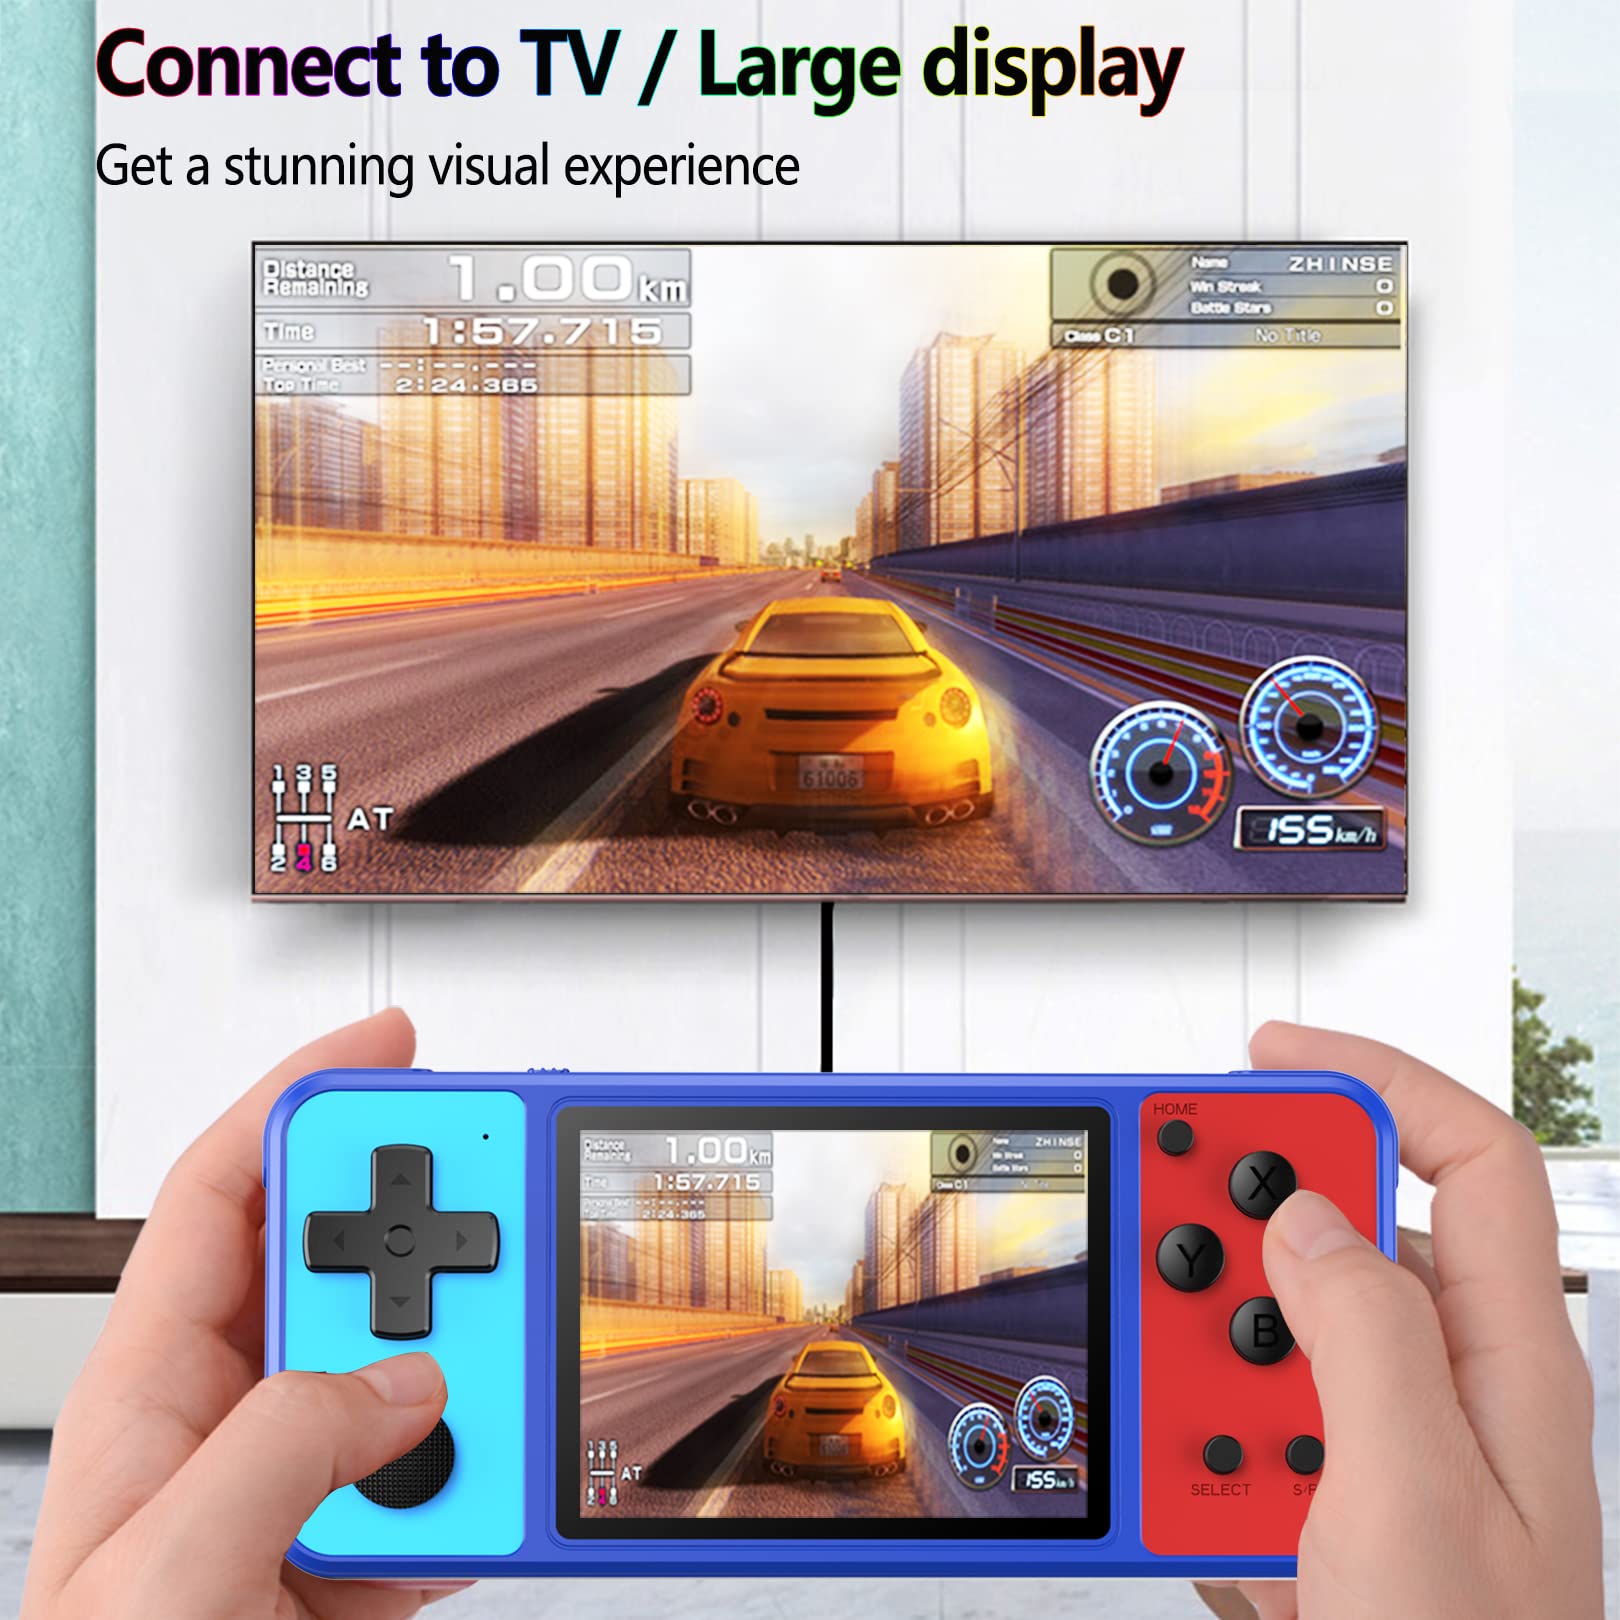 Great Boy Handheld Game Console for Kids Preloaded 270 Classic Retro Games with 3.0'' Color Display and Gamepad Rechargeable Arcade Gaming Player (Blue)